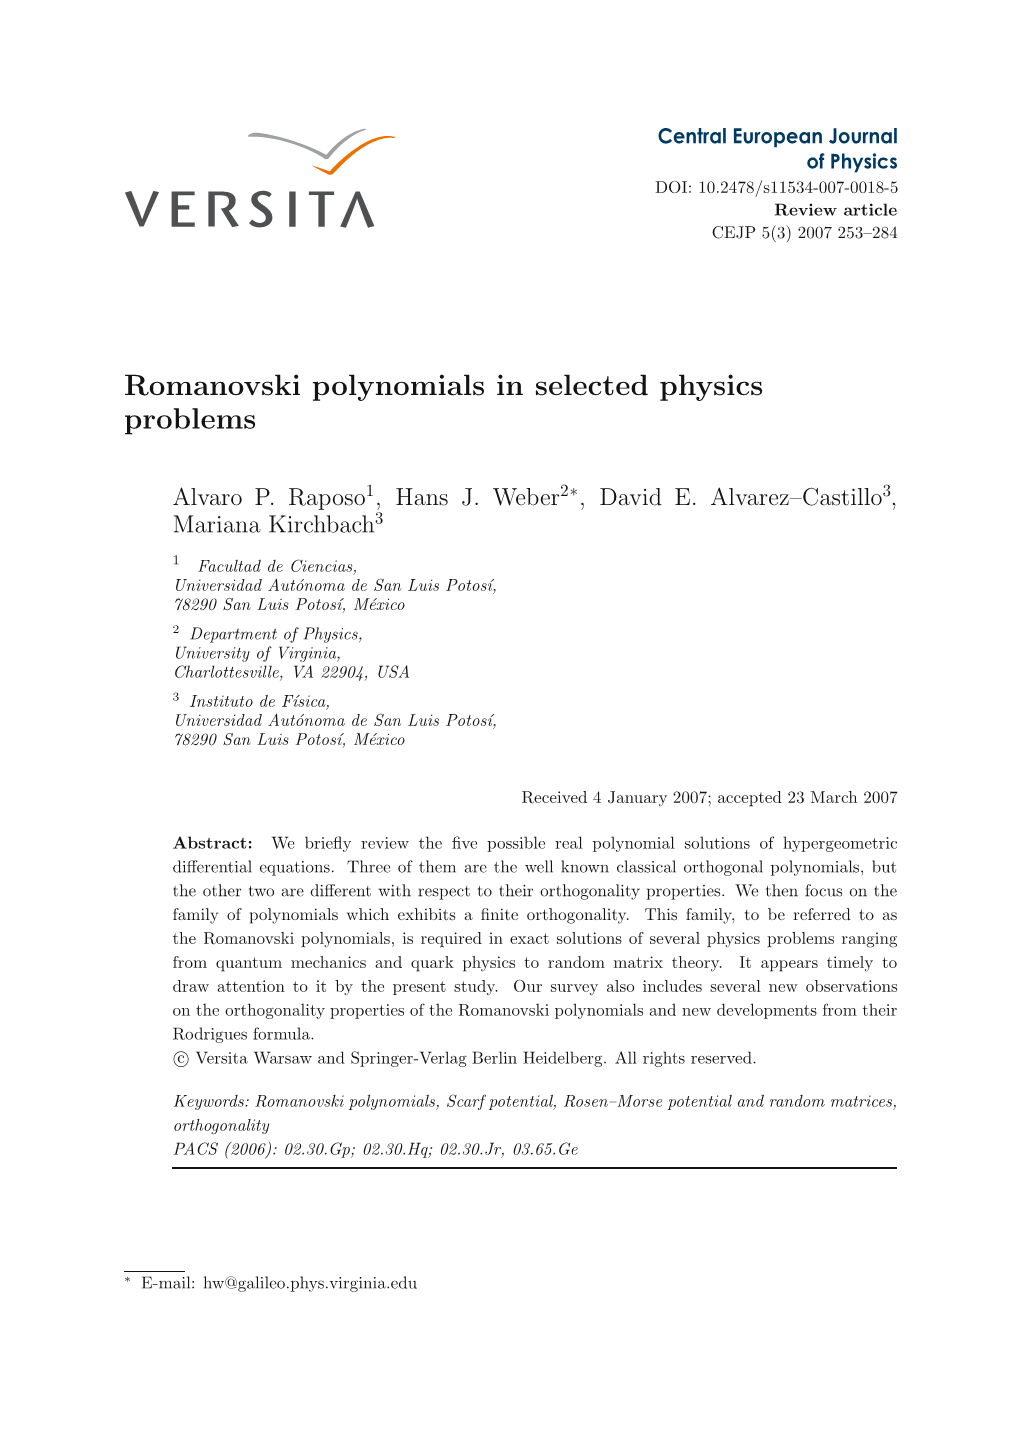 Romanovski Polynomials in Selected Physics Problems